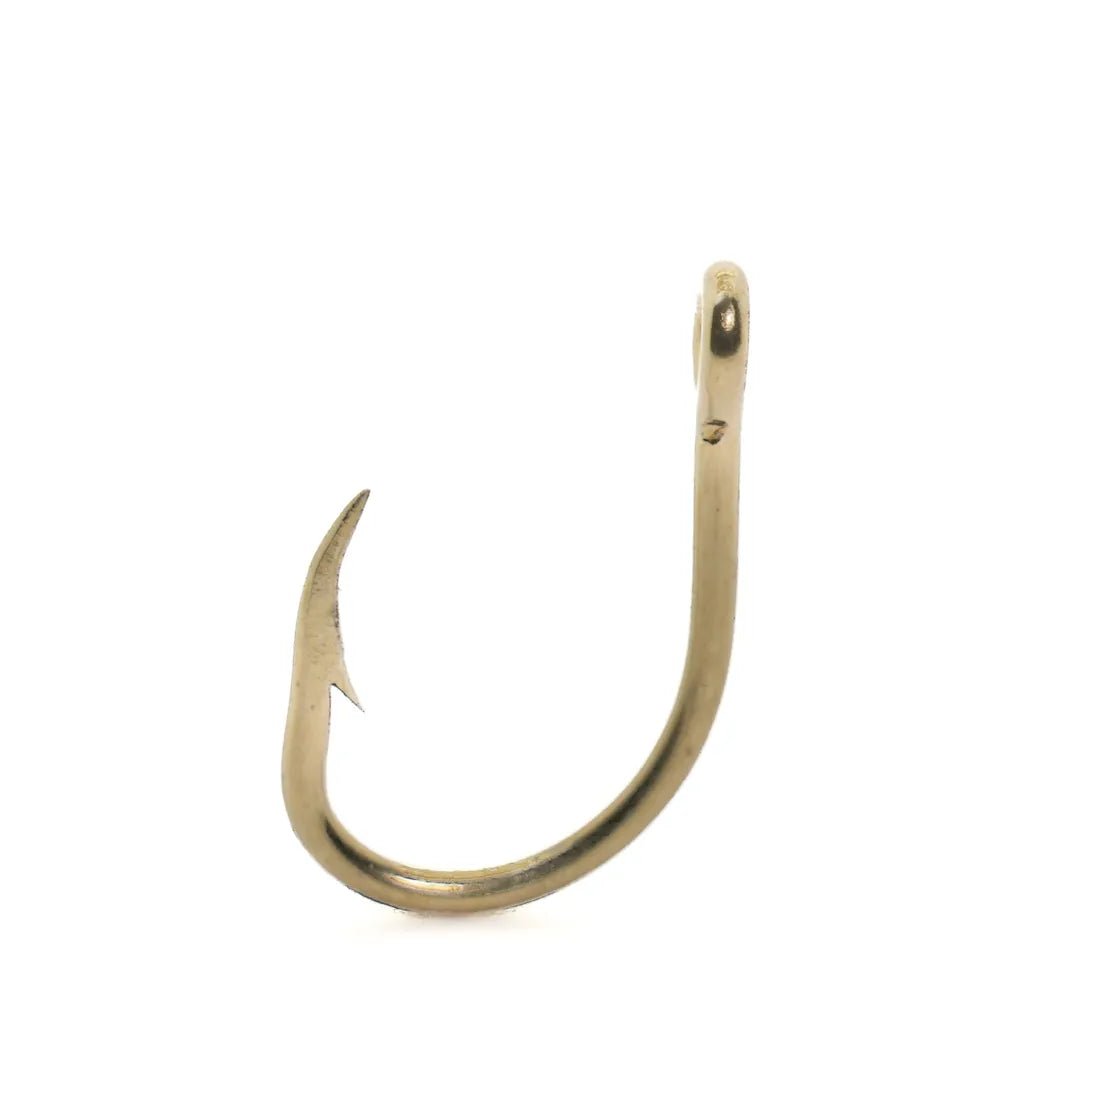 Buy Hooks For Live Baits Online in at Best Prices on desertcart Cyprus